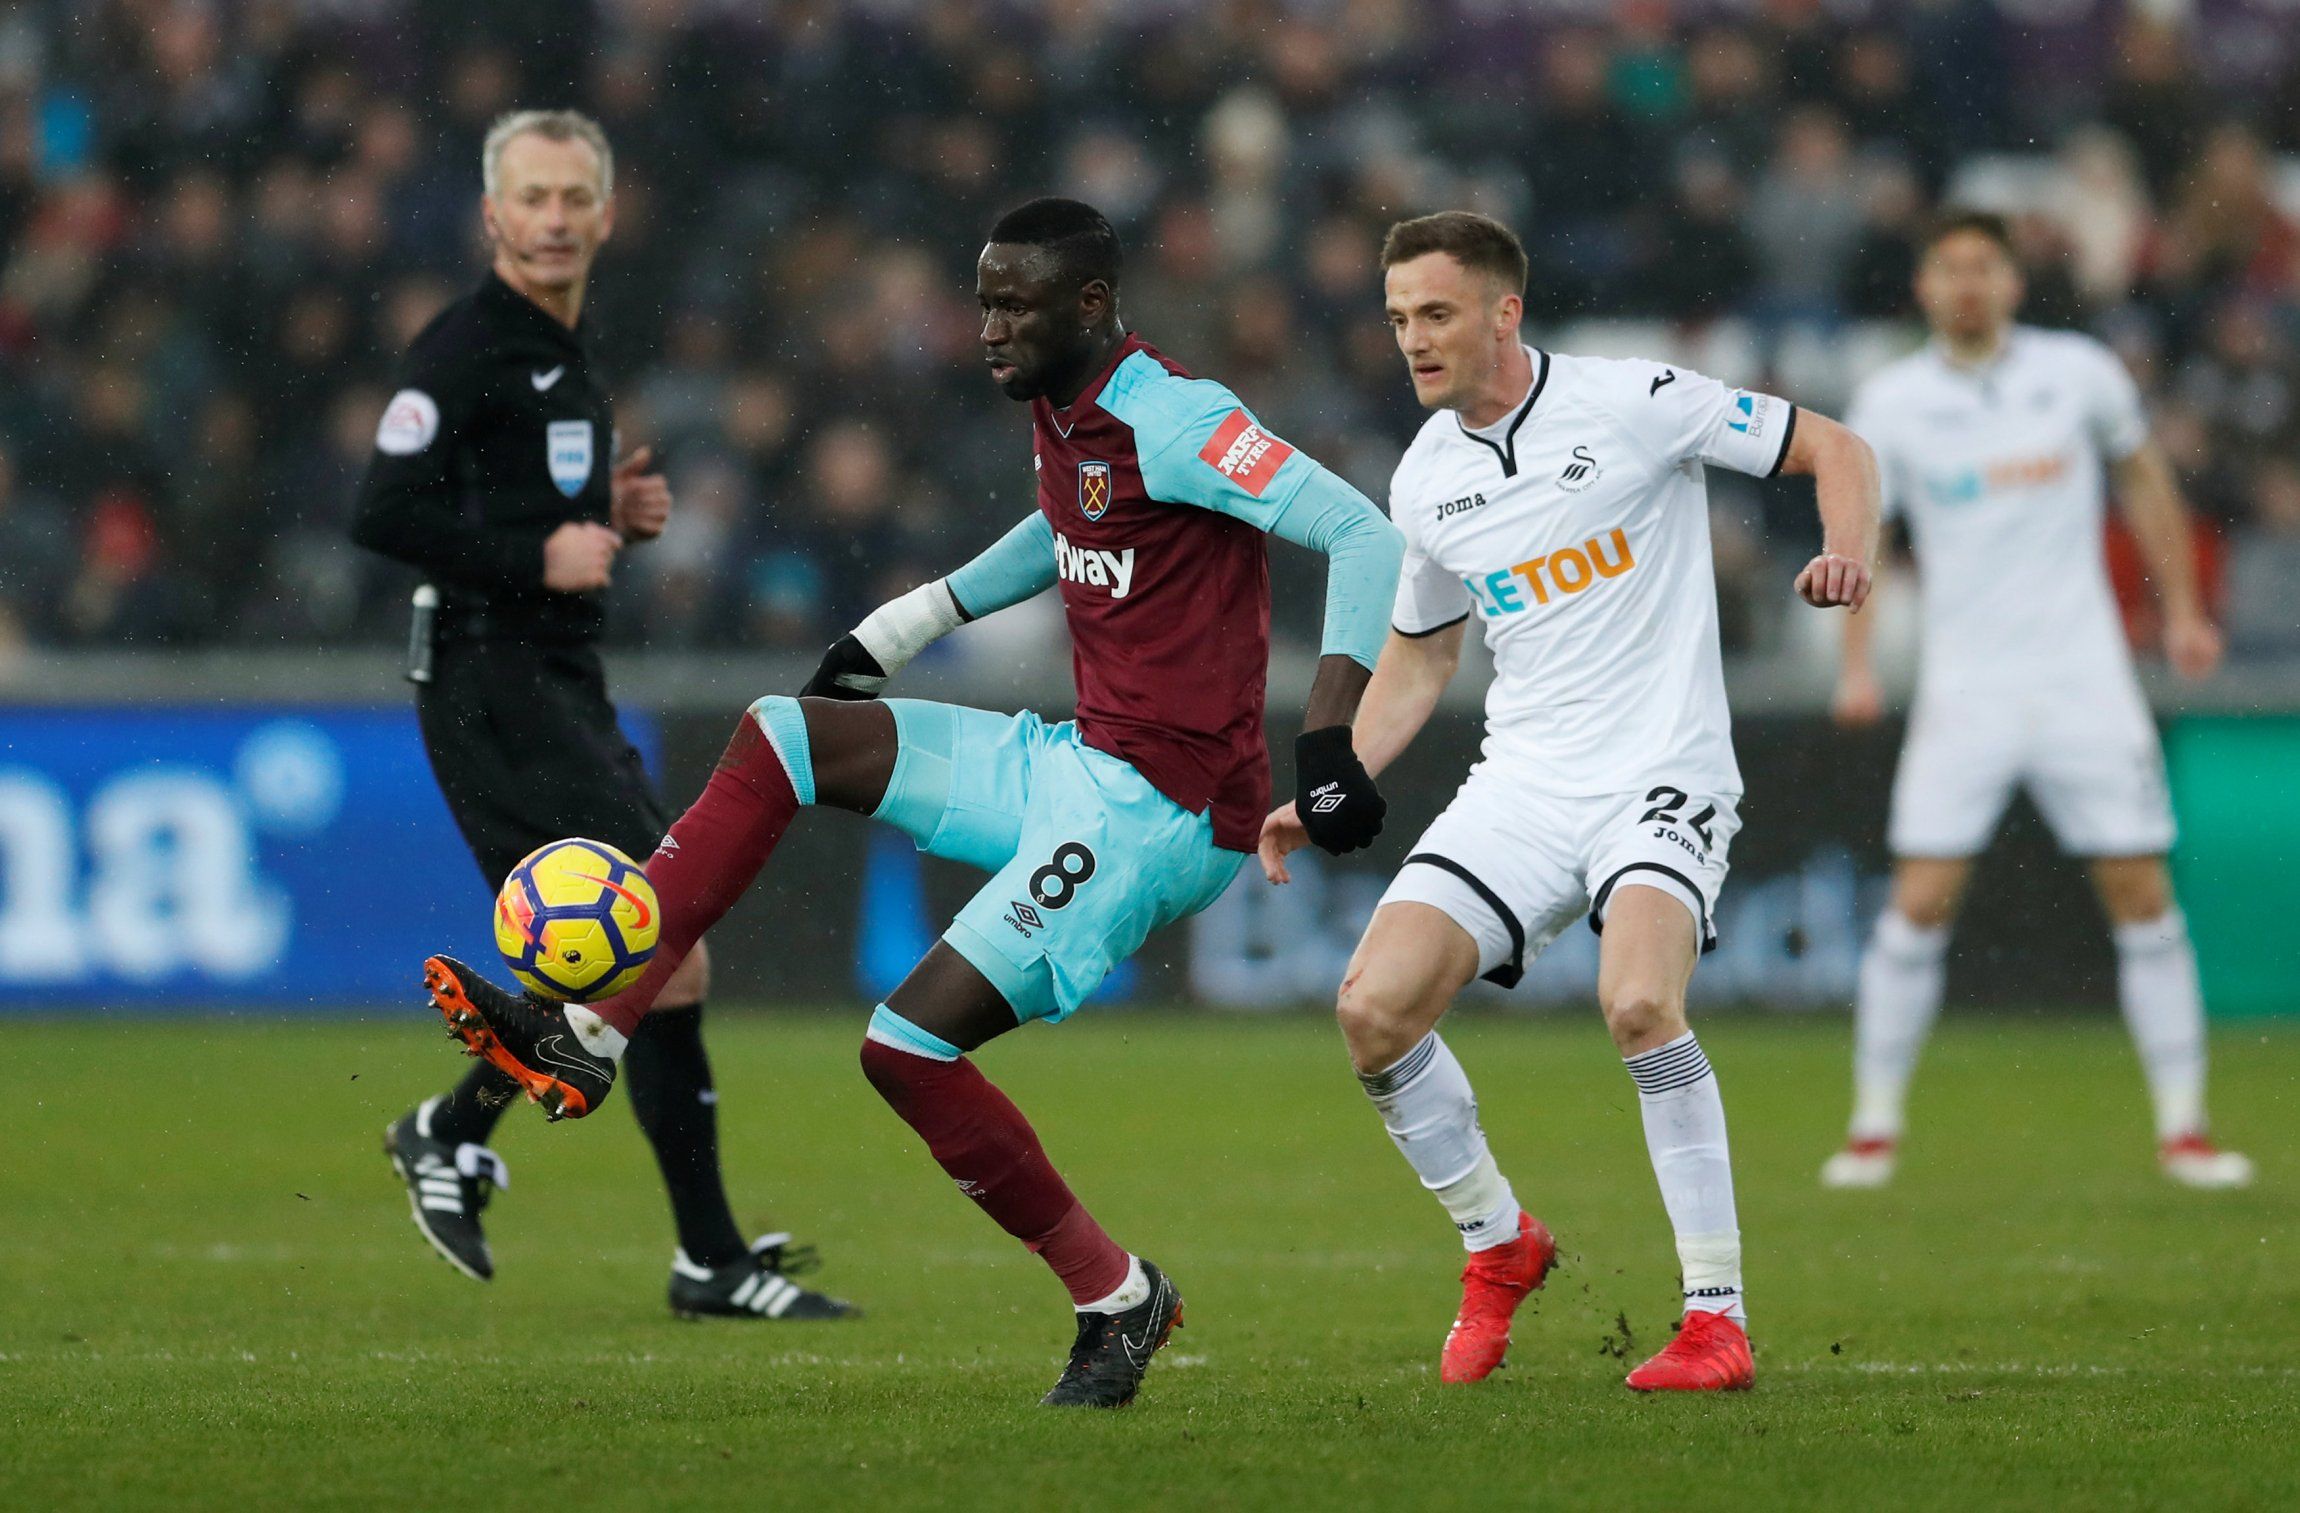 Cheikhou Kouyate in action for West Ham United